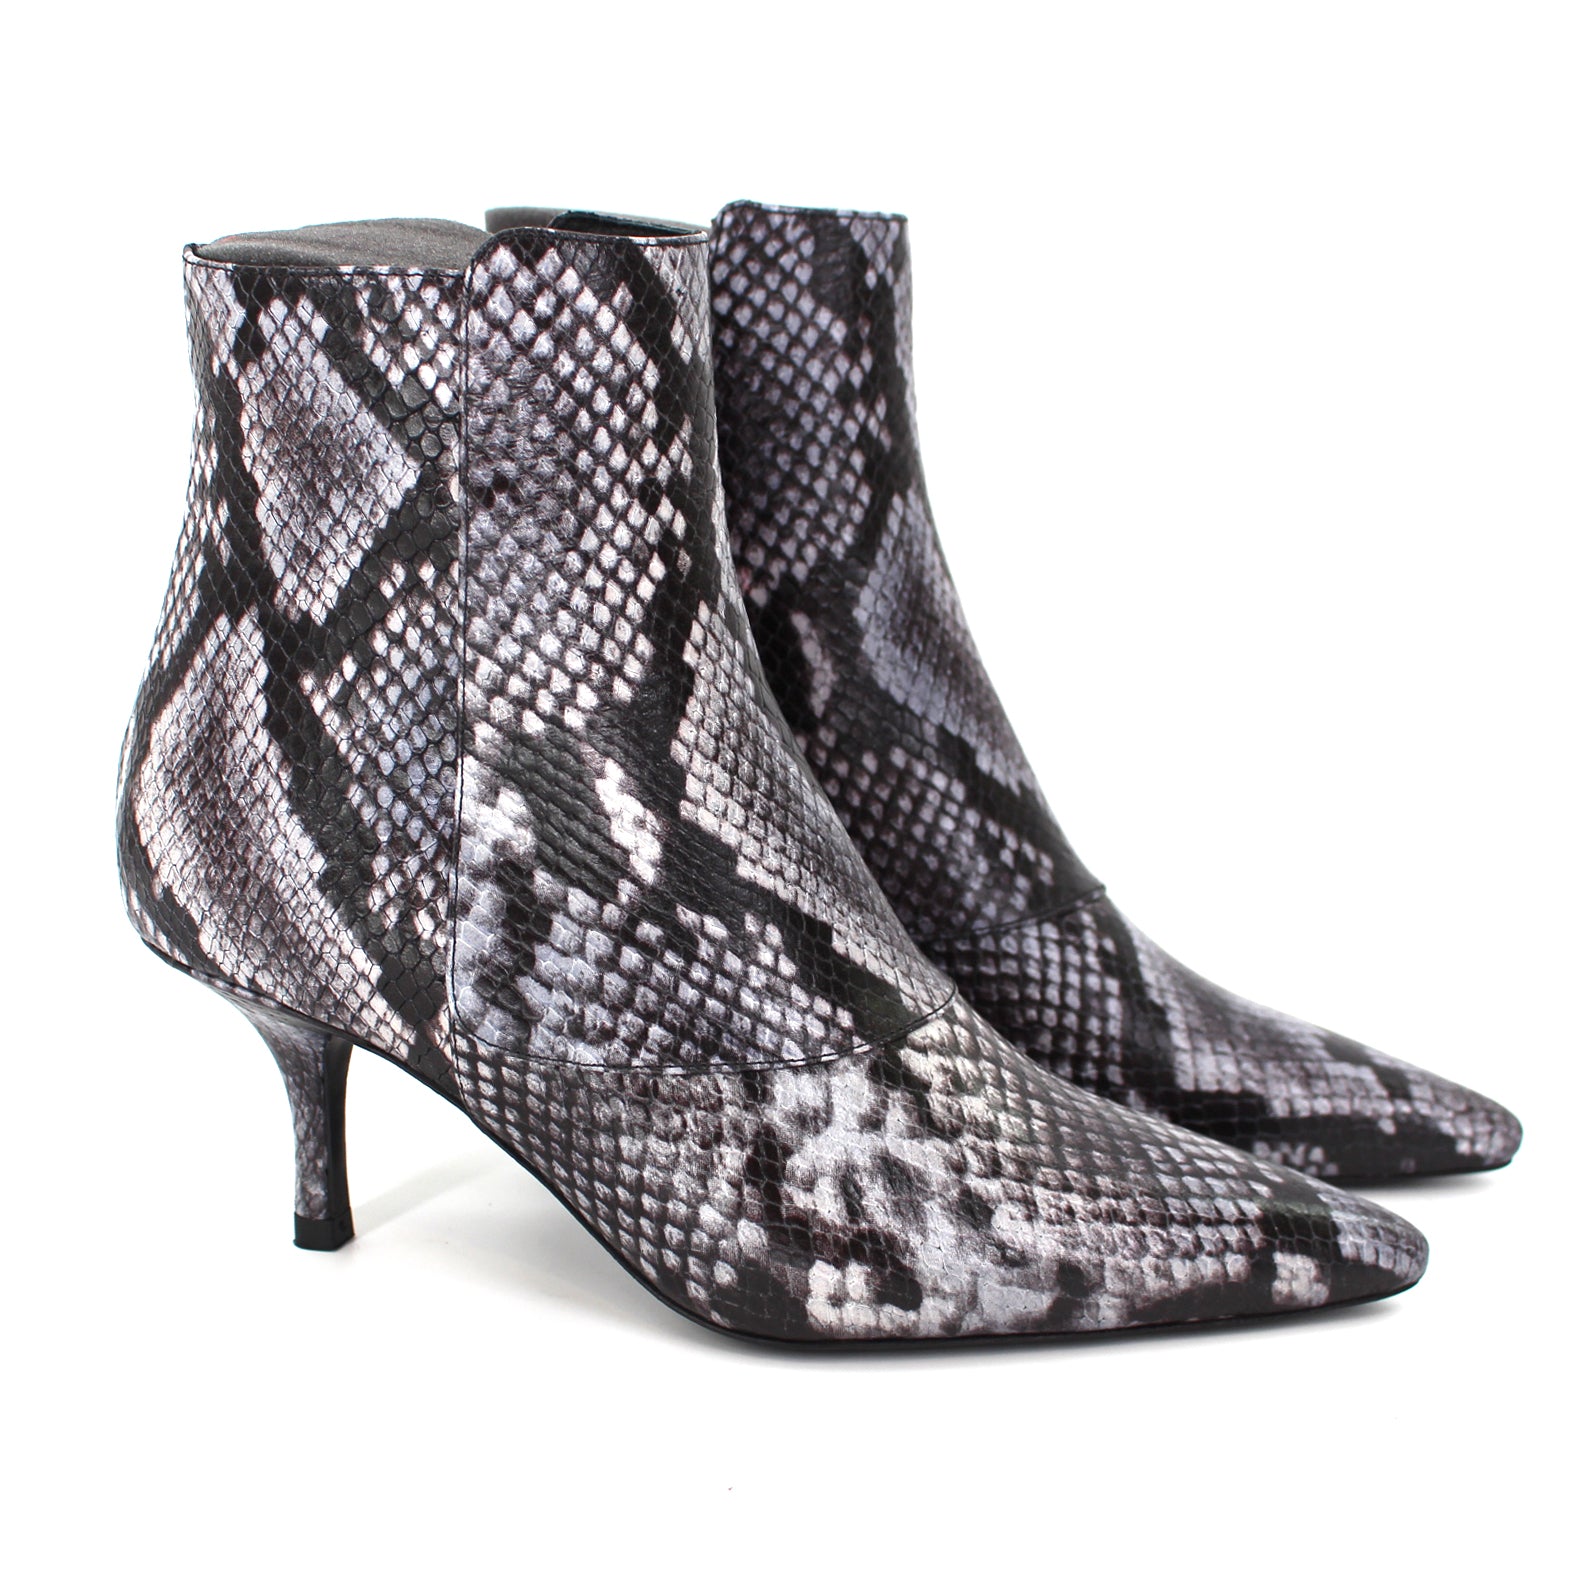 Anine Bing Ava Cloudy Blue Python Leather Kitten Heel Ankle Bootie ...